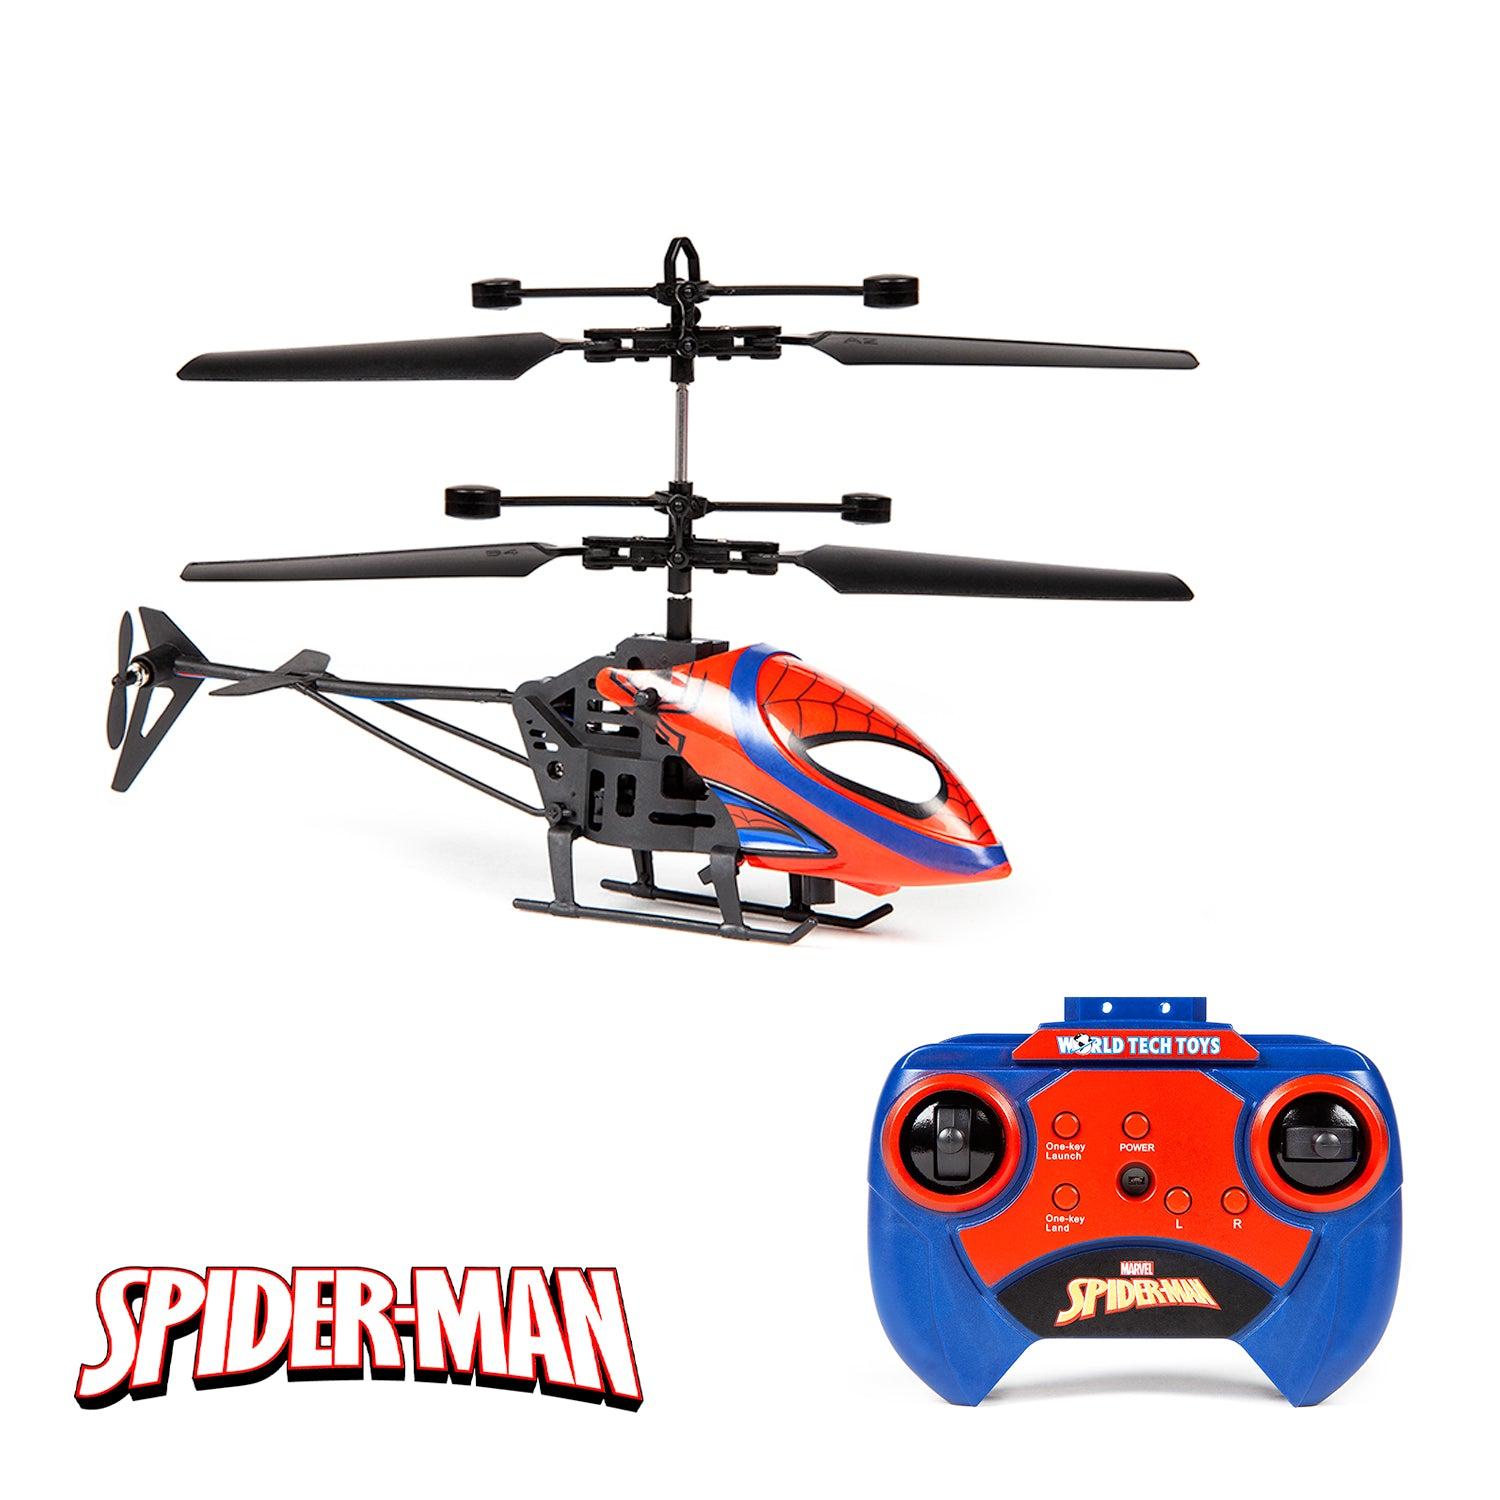 Remote Control Helicopter Spider Man: Features That Make the Remote Control Helicopter Spider Man Toy Safe for Children